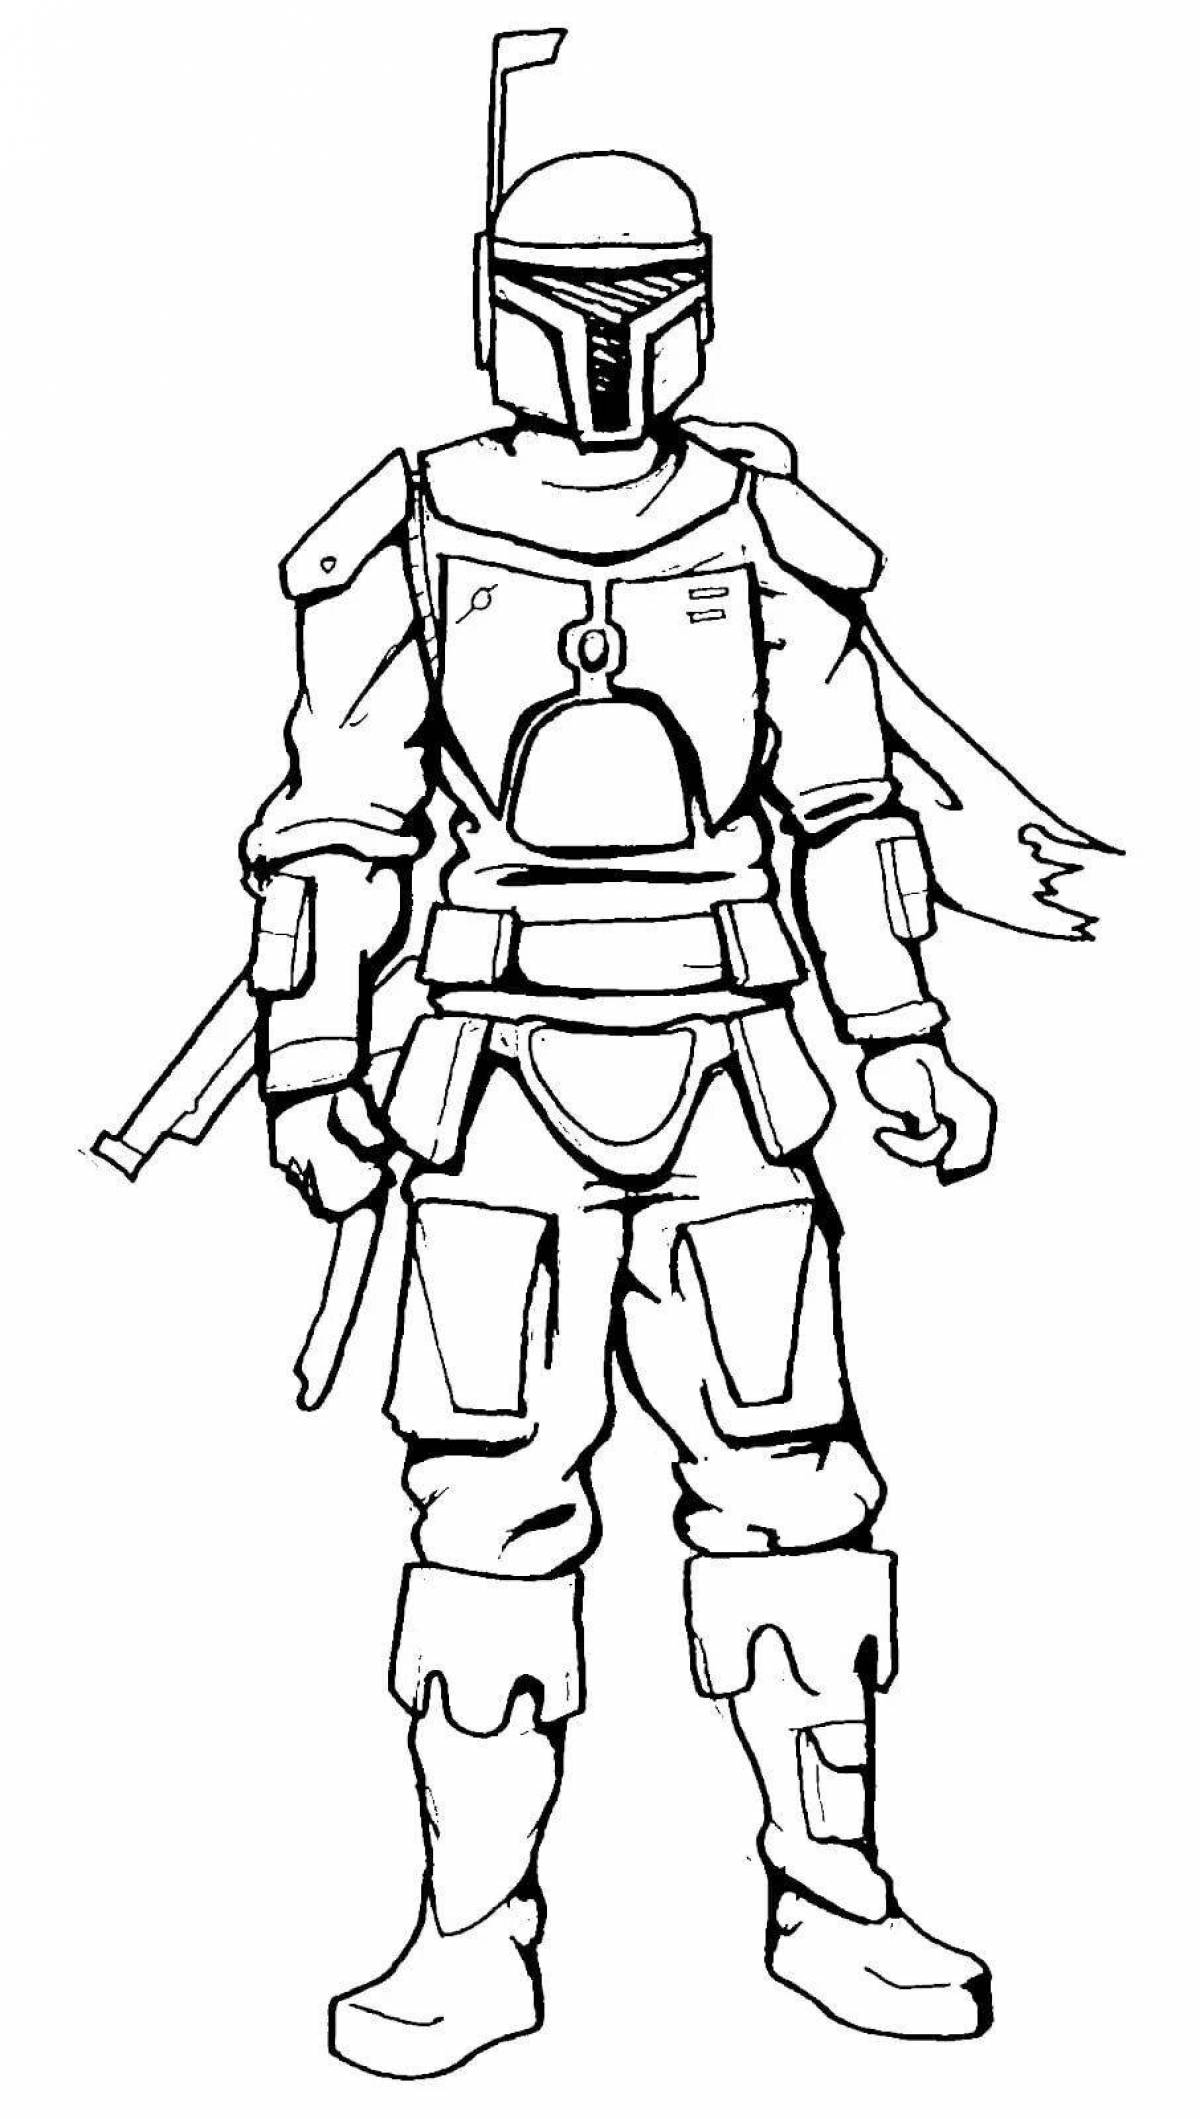 Colorful boba fett coloring page